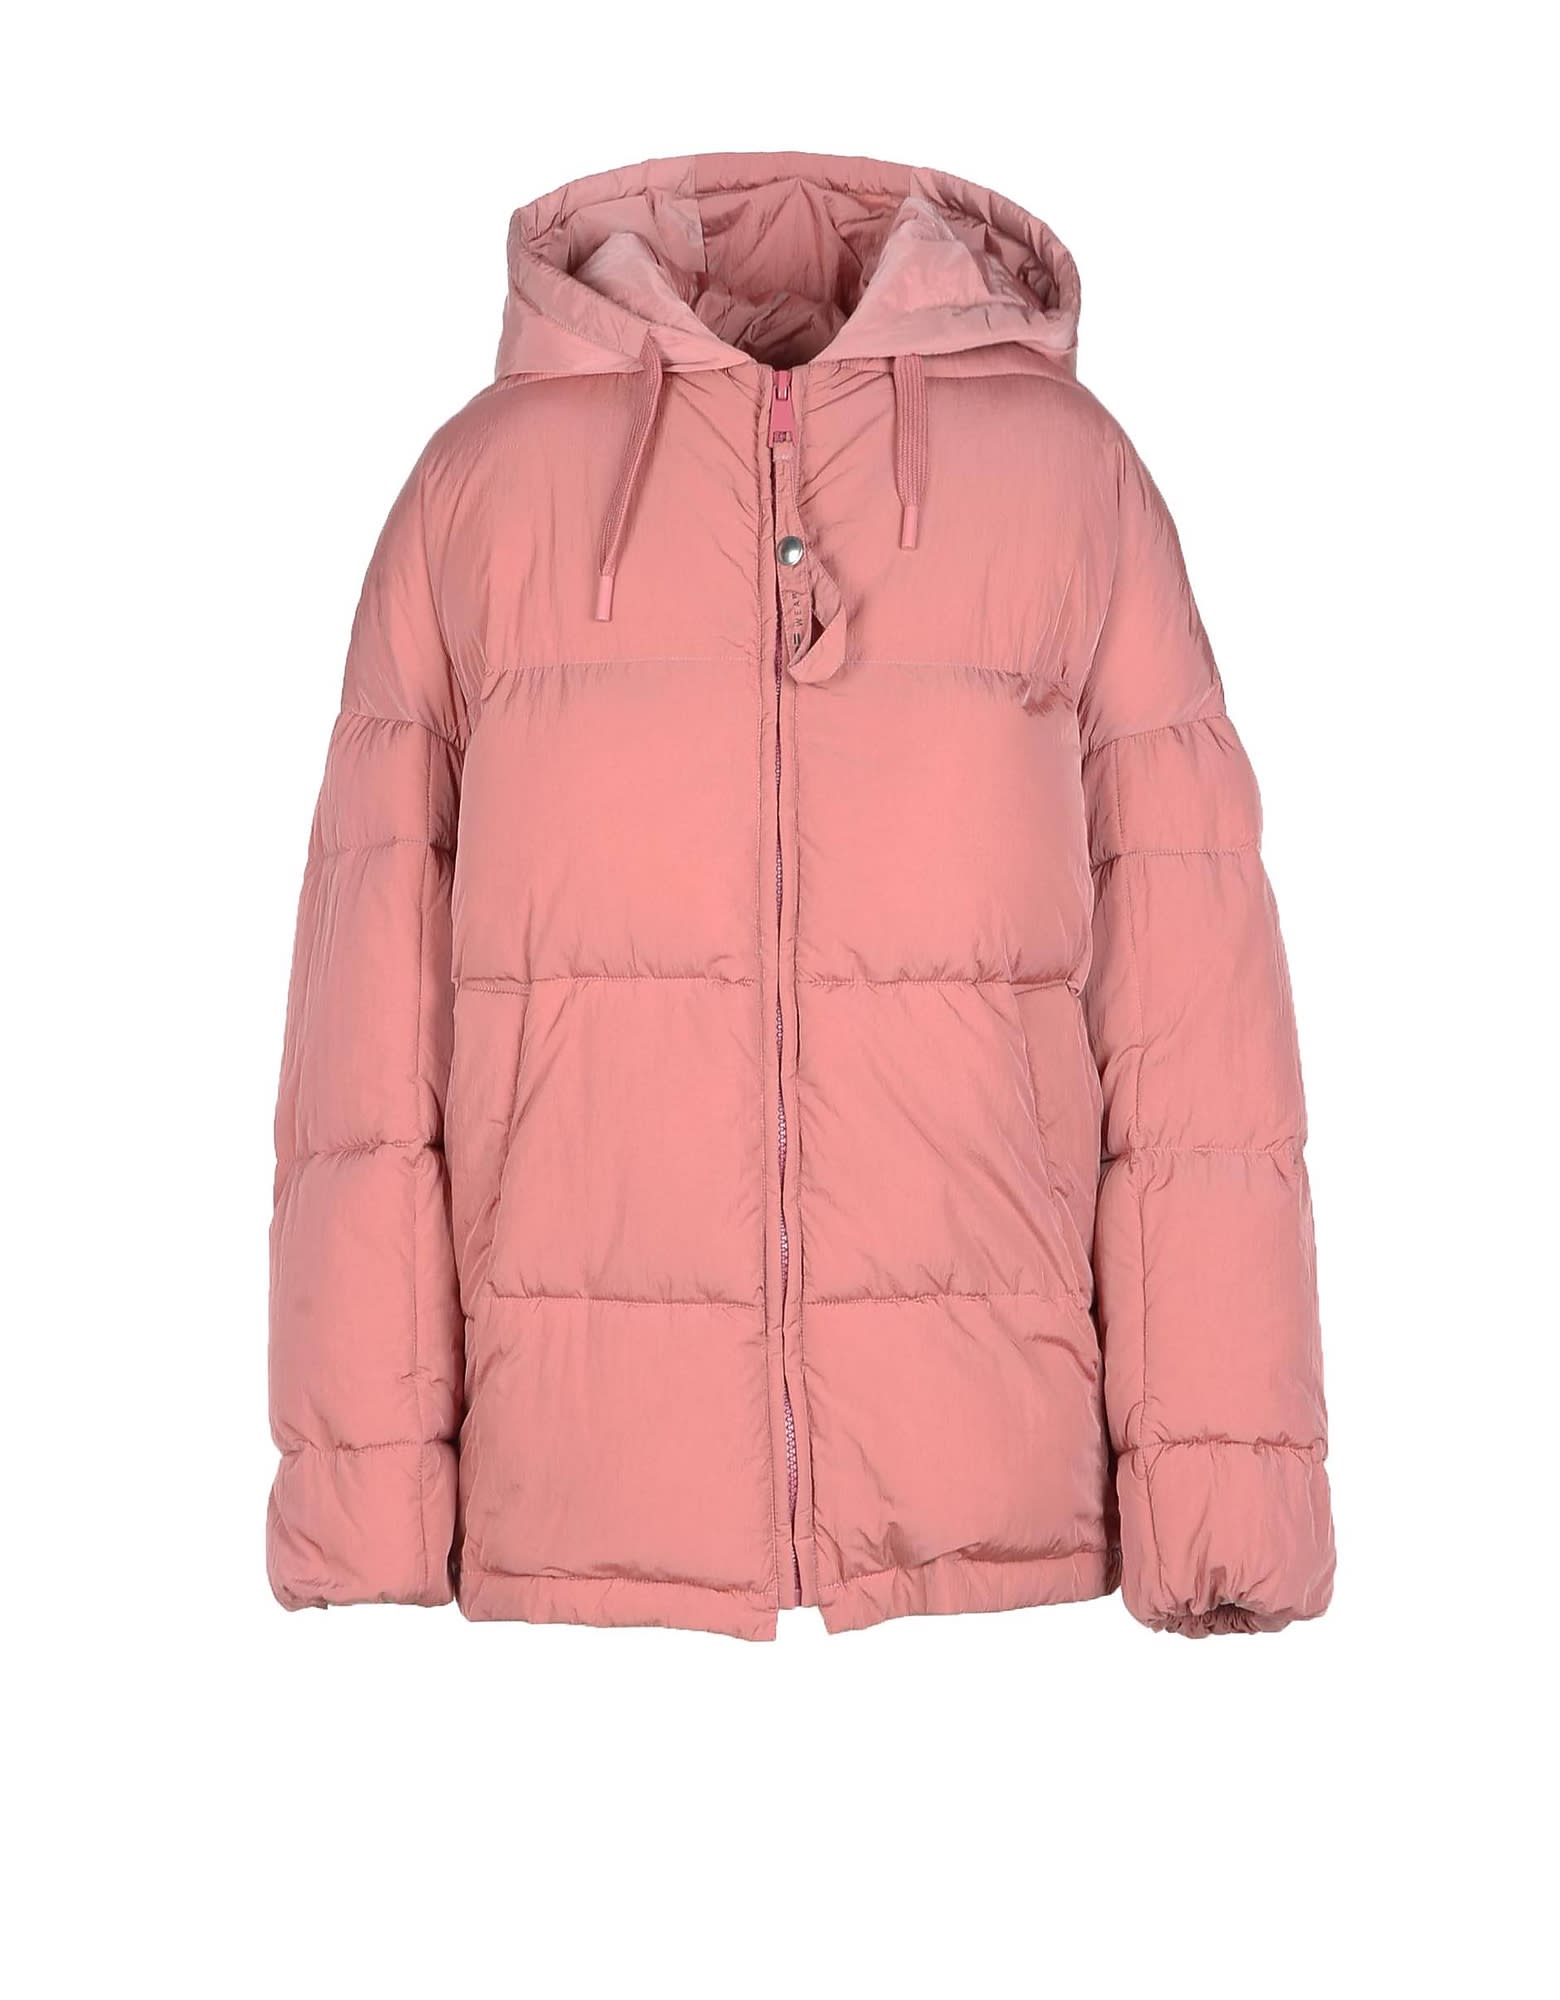 OOF Wear Womens Antique Pink Padded Jacket